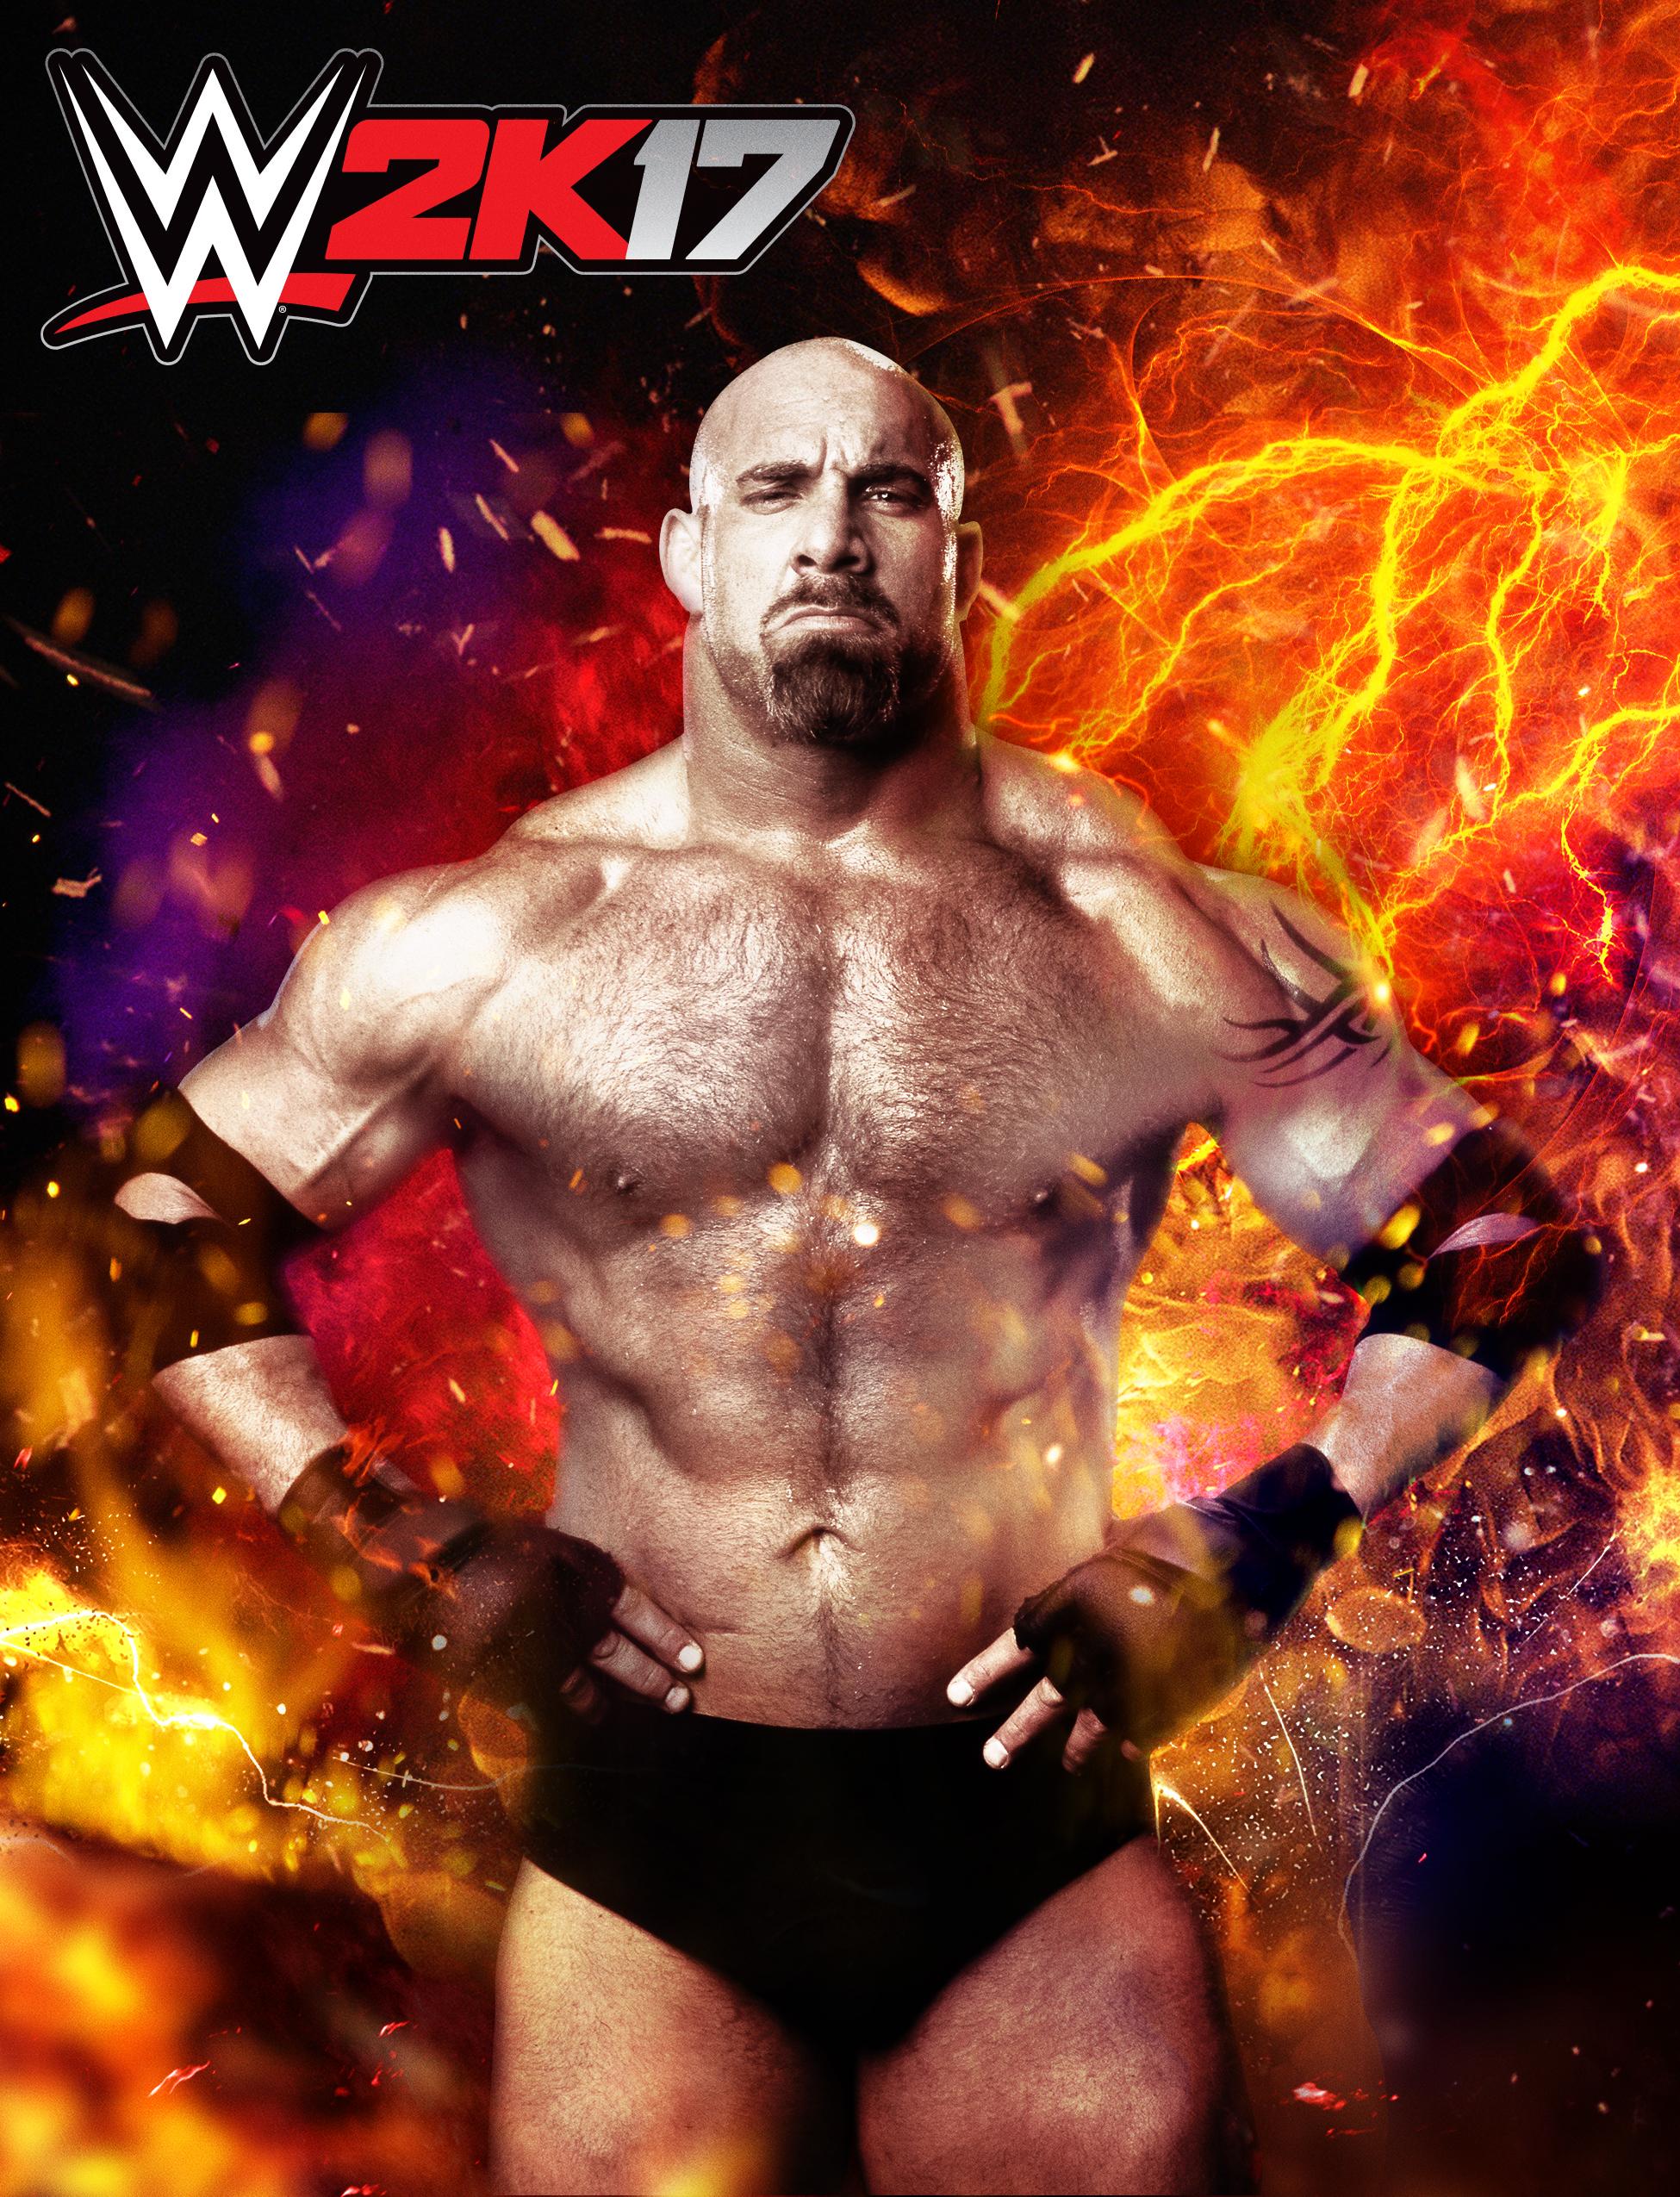 Pre Order Wwe 2k17 And You Ll Get Bill Goldberg With Two